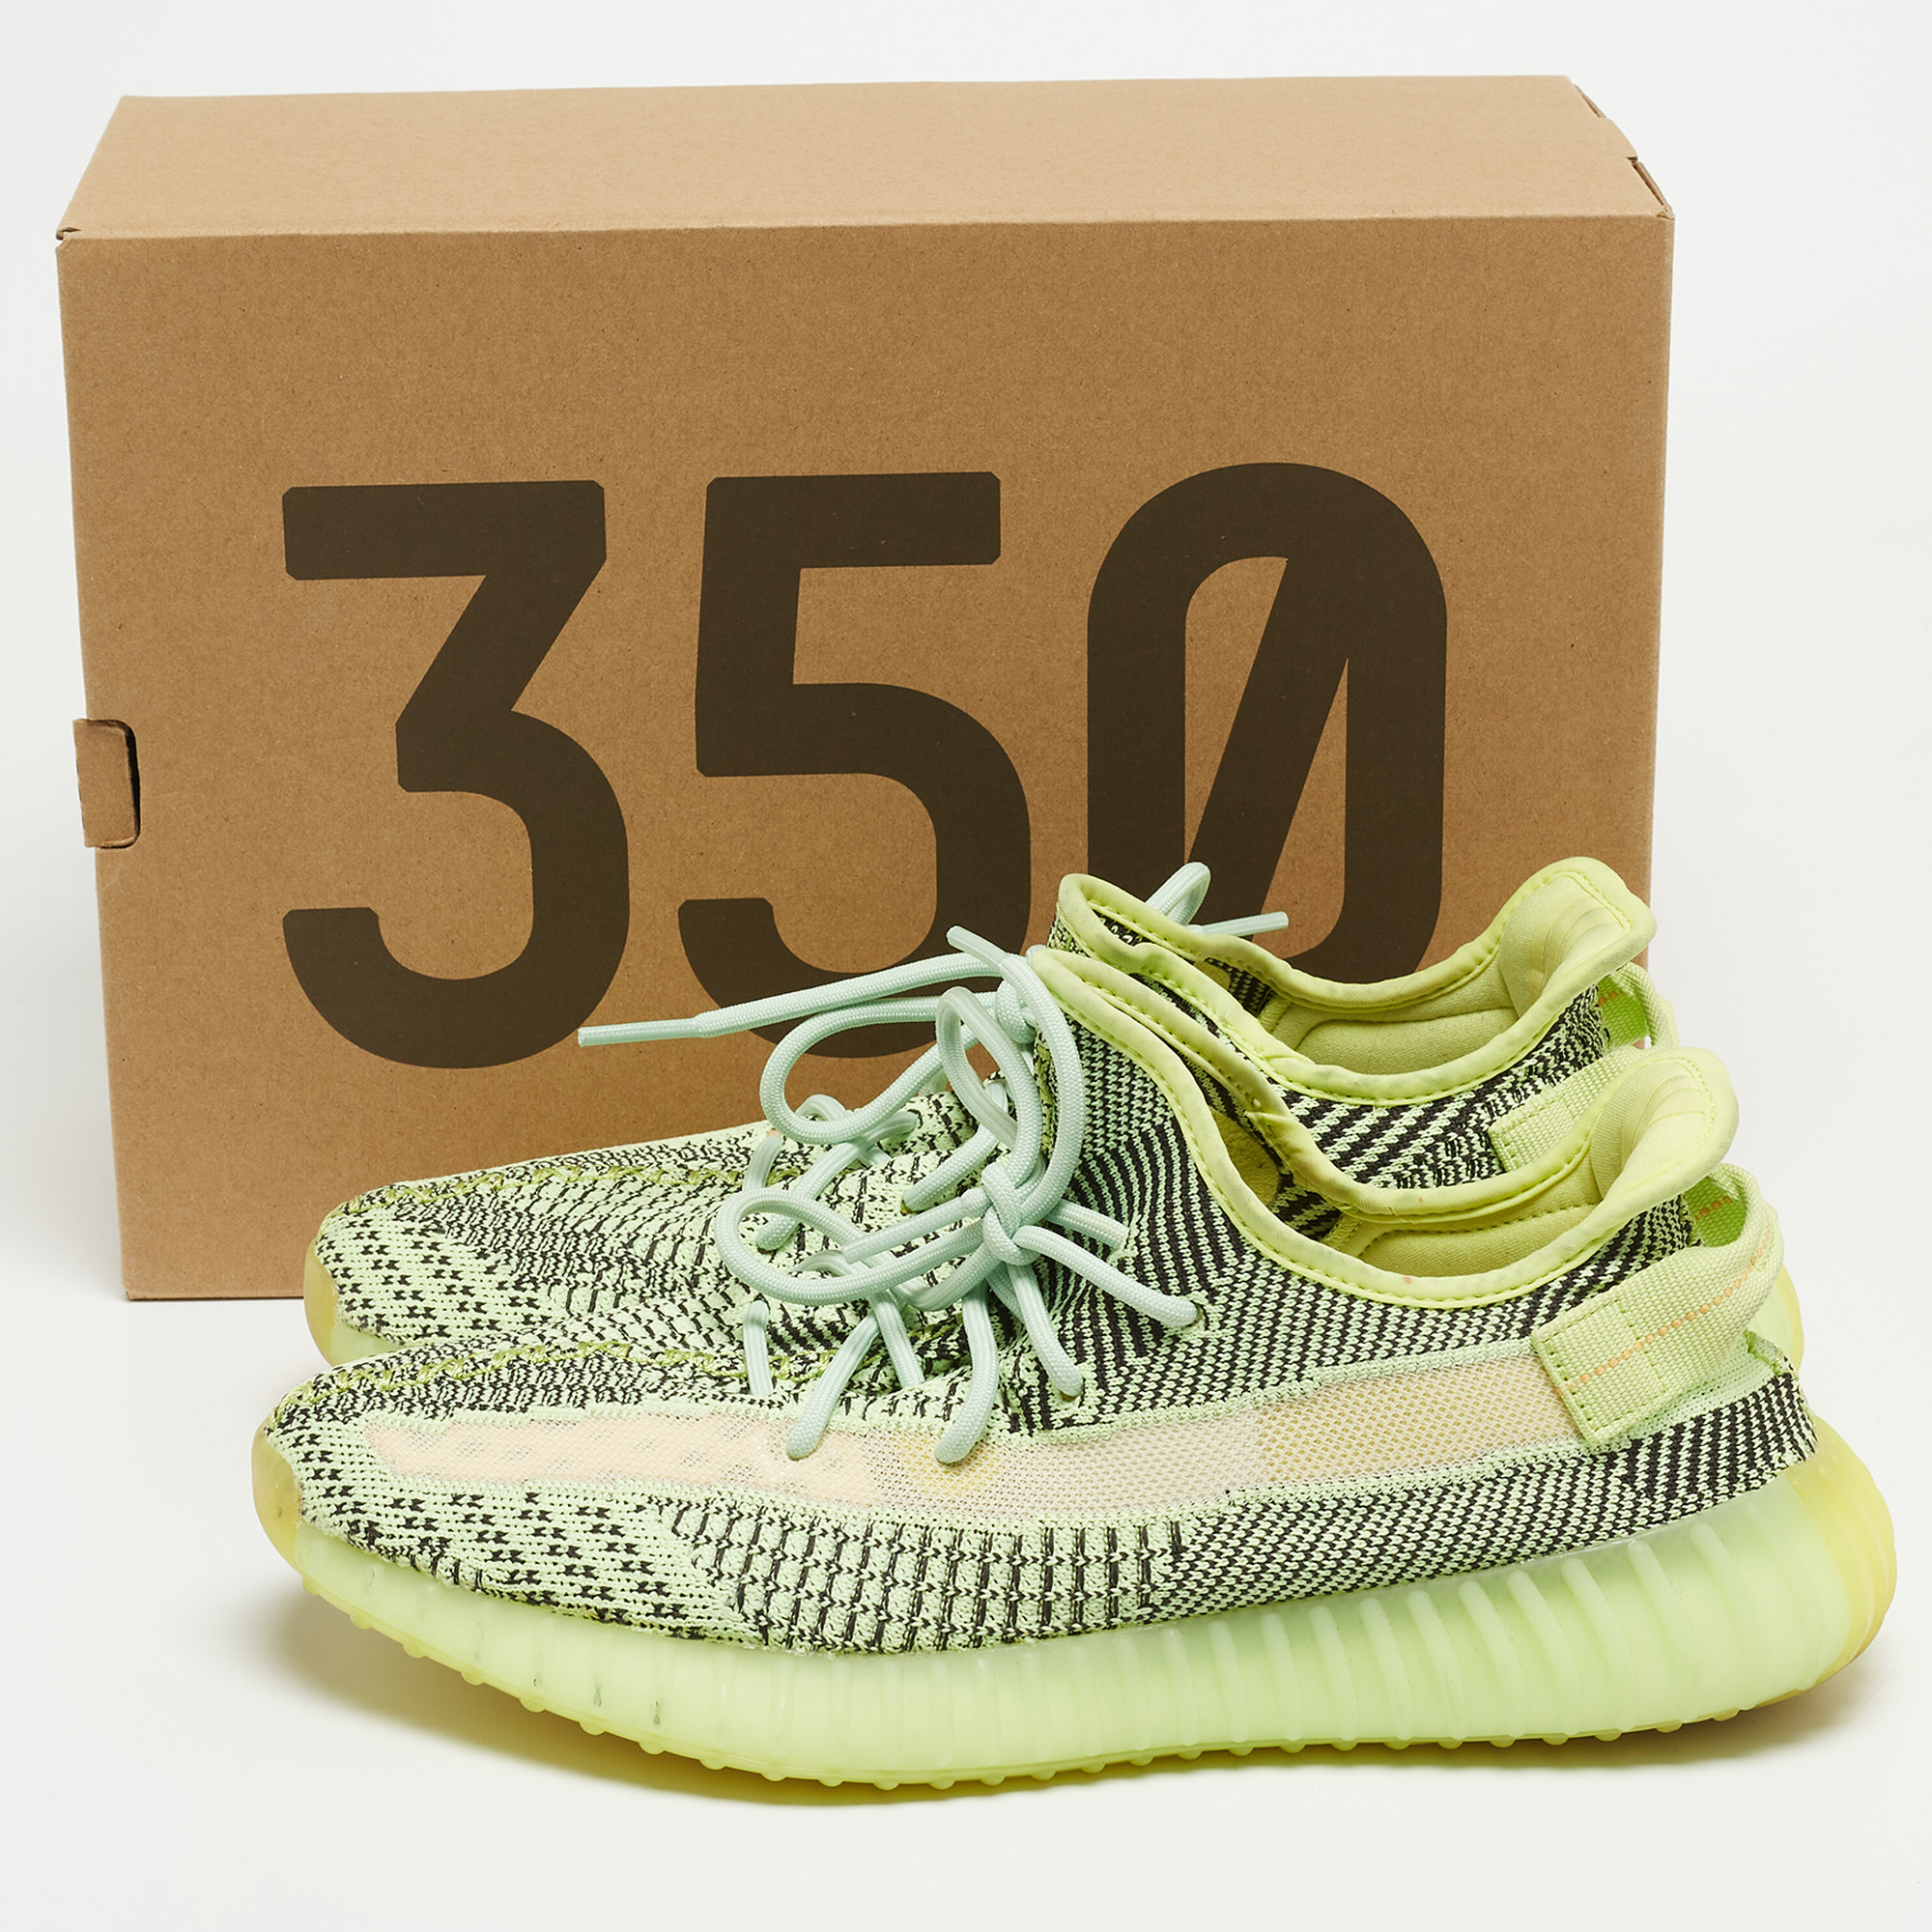 Yeezy X Adidas Neon Green Knit Fabric Boost 350 V2 Yeezreel (Non Reflective) Sneakers Size 44 2/3